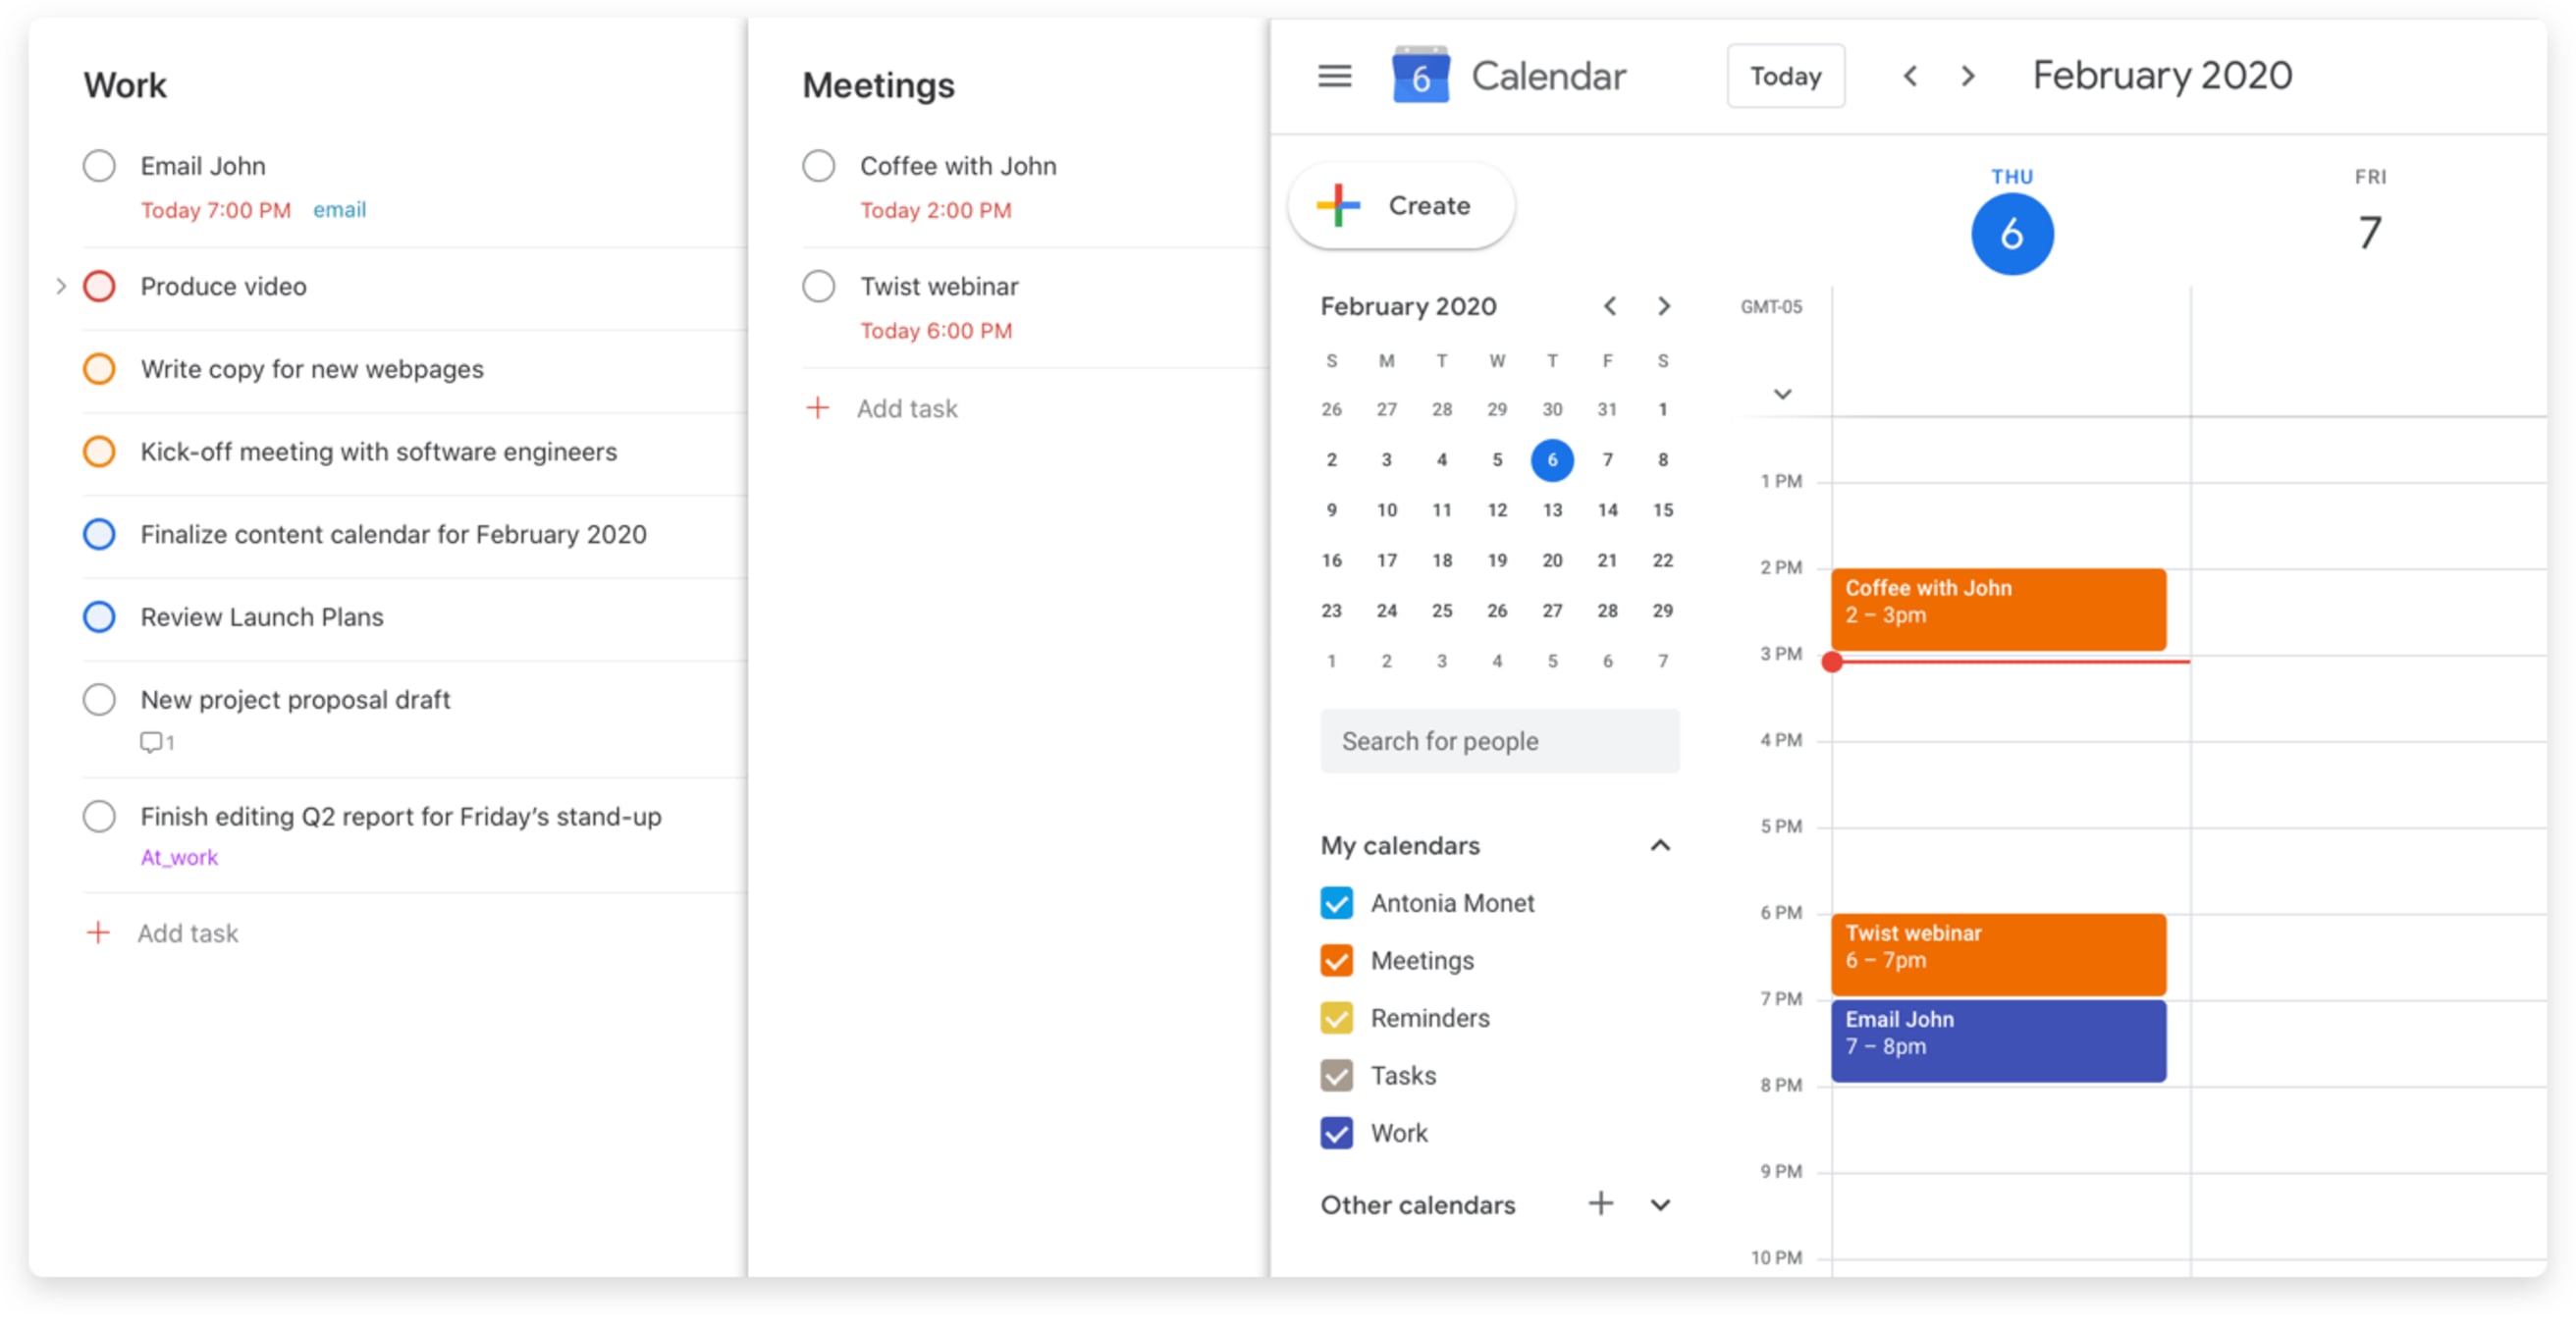 Calendar showing scheduled tasks and meetings synced between Todoist and Google Calendar. 